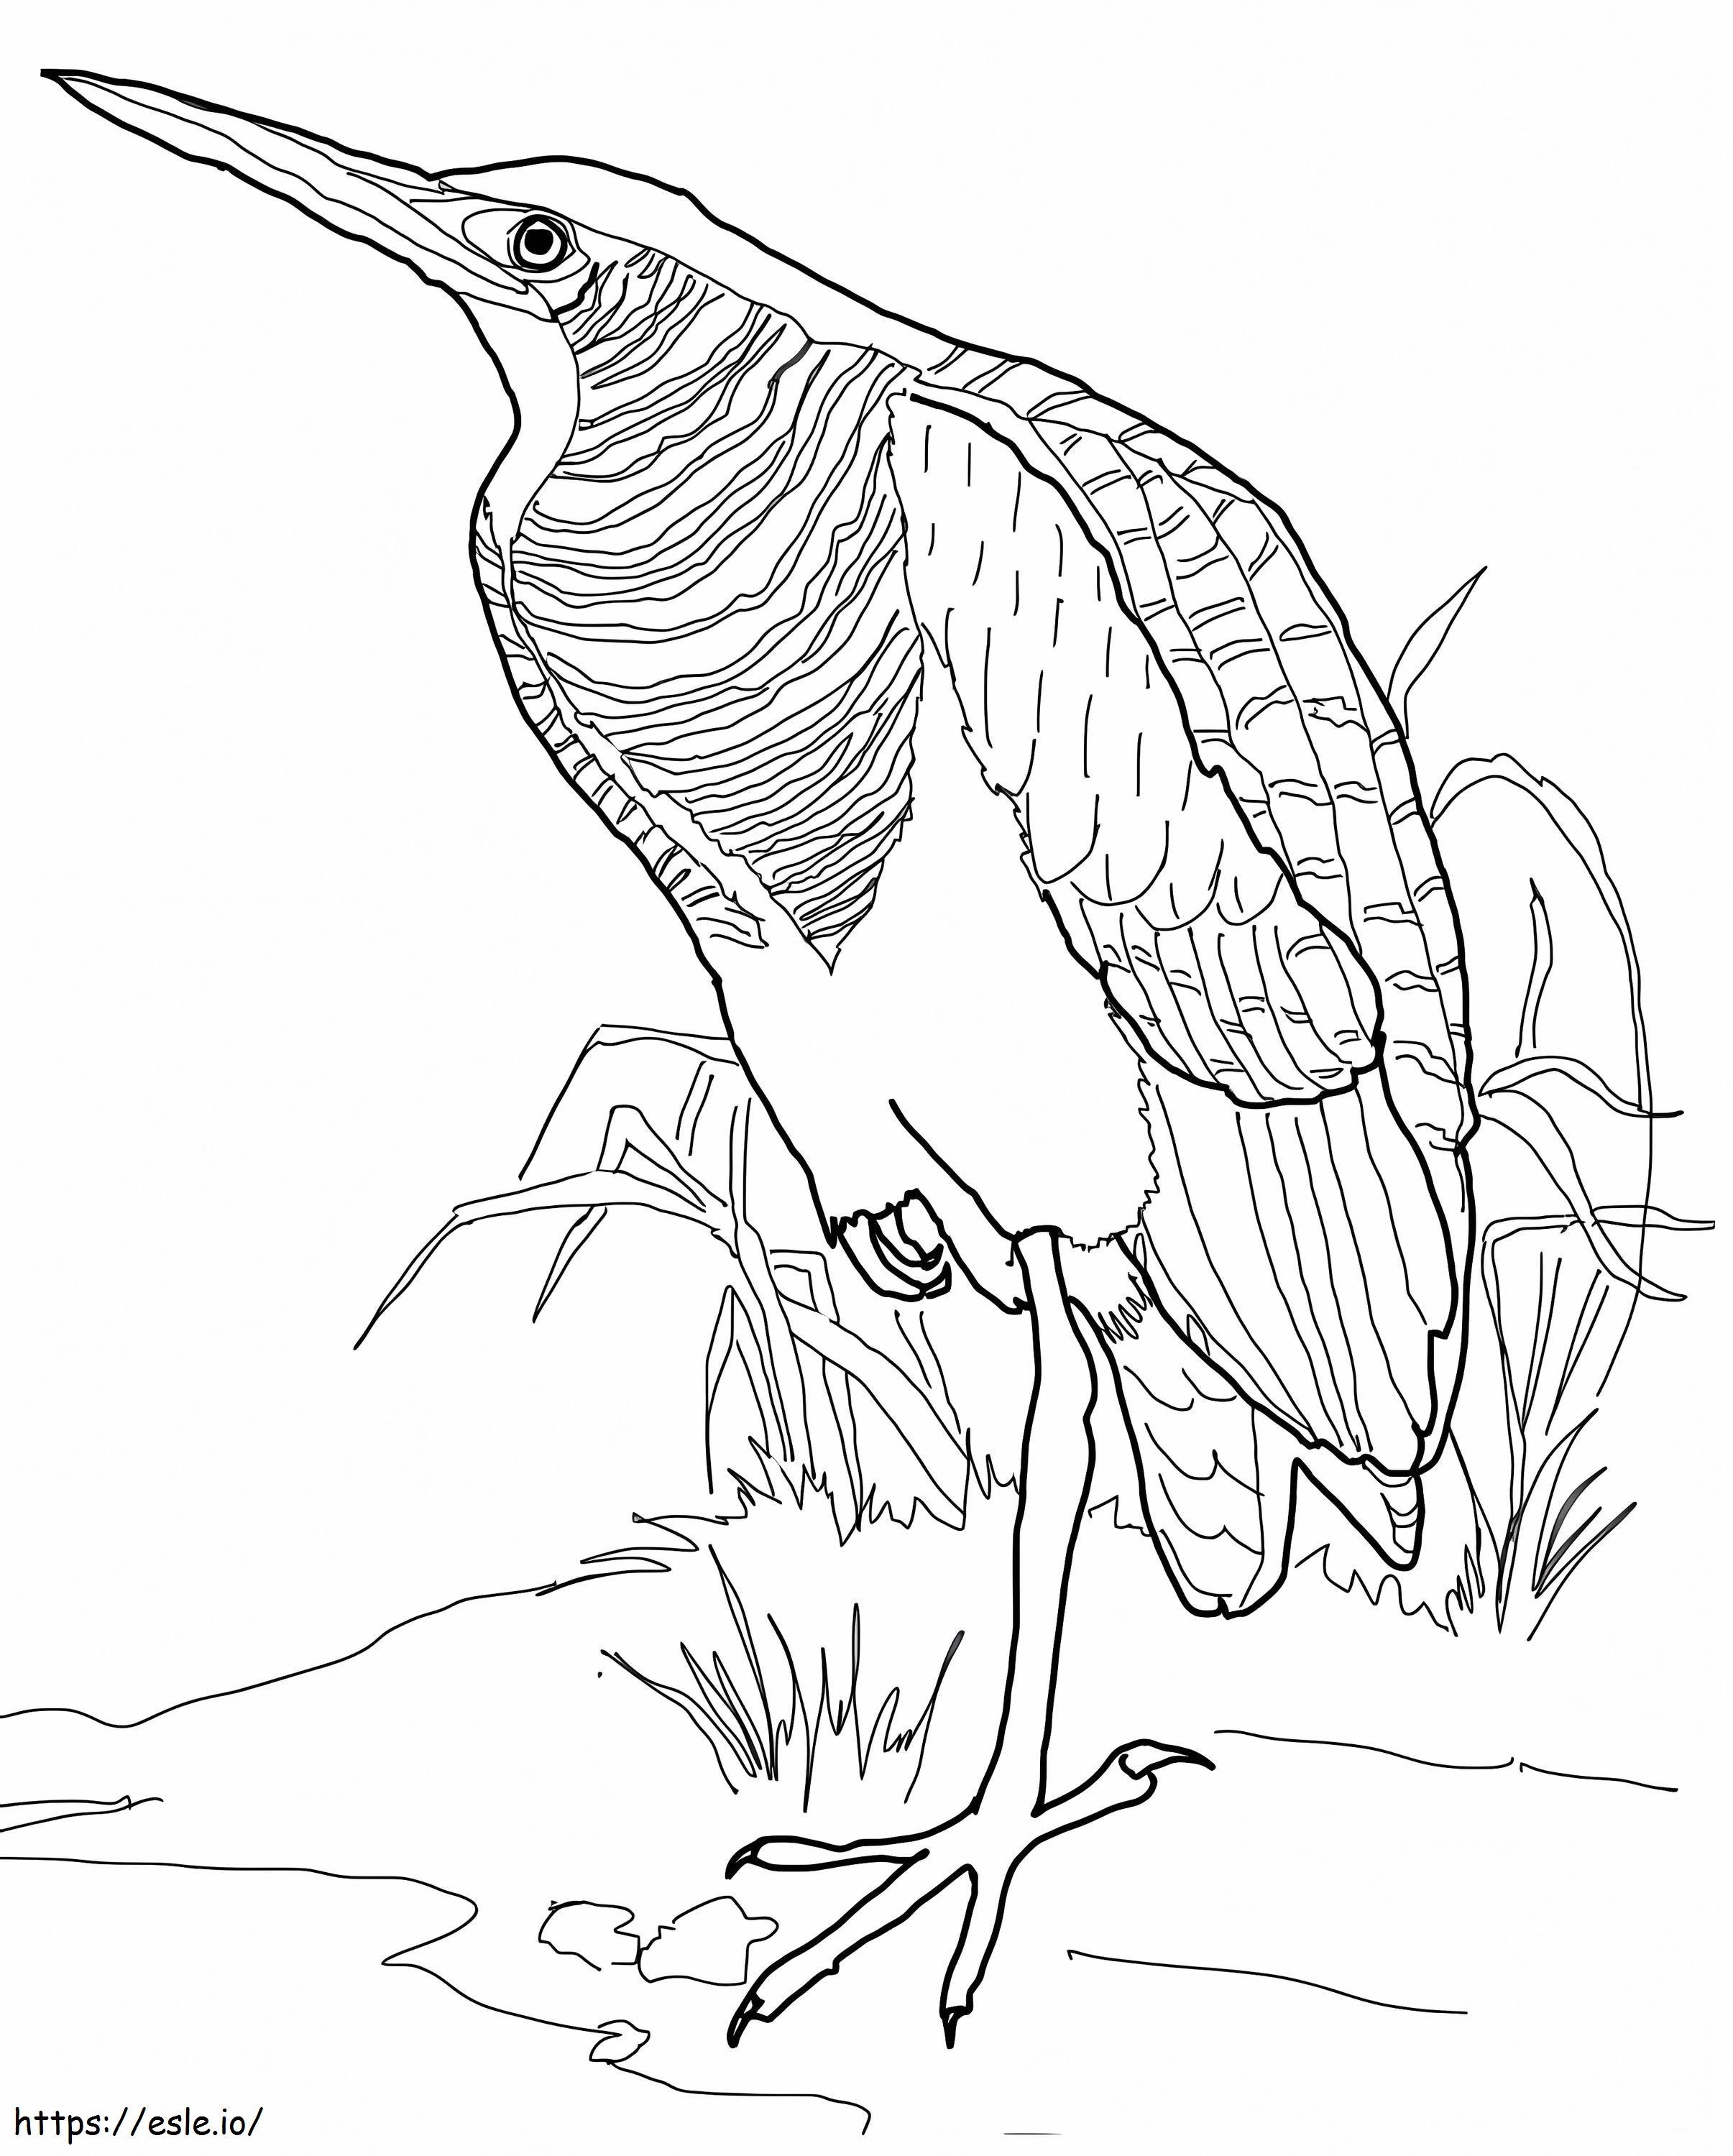 Normal Bitterness coloring page